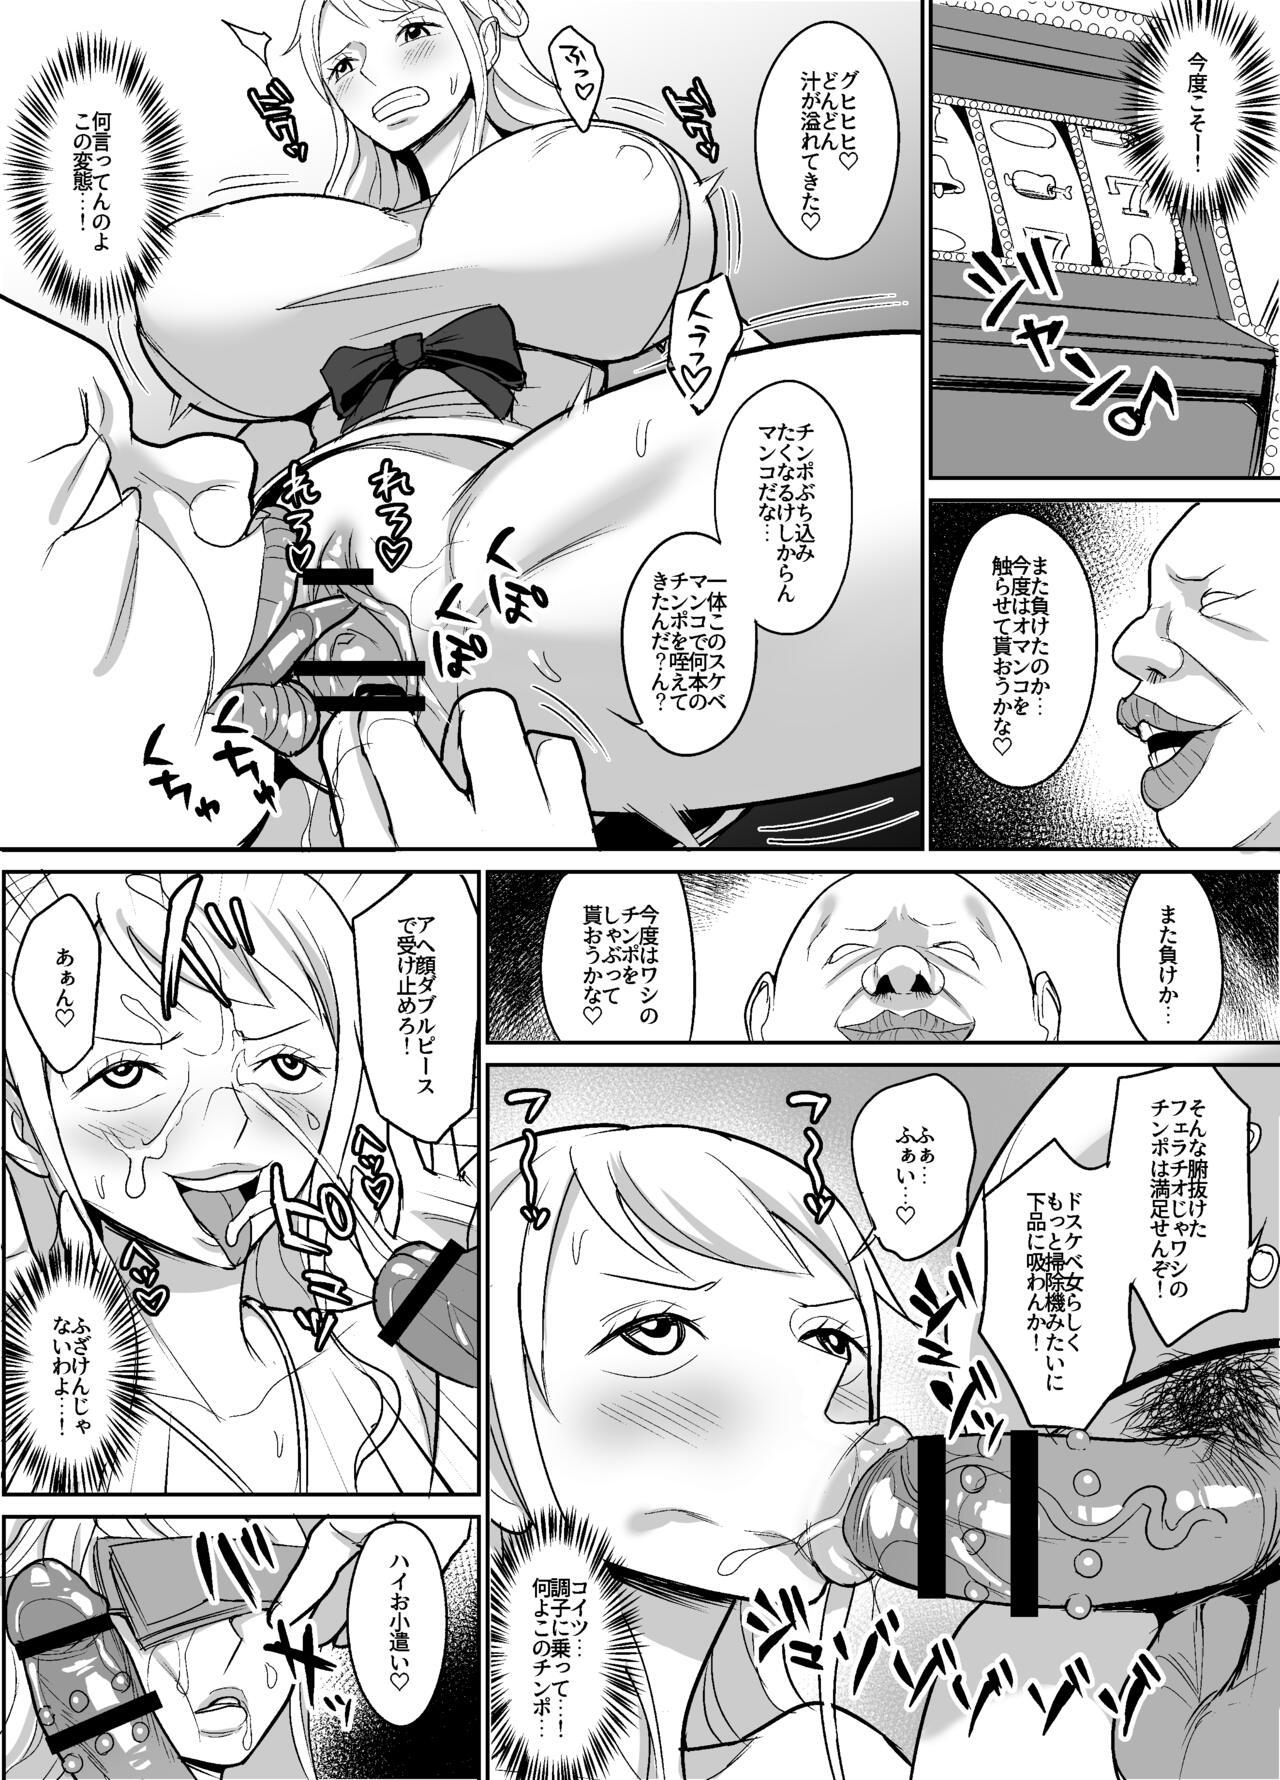 Anal Gape Nami Ver. Gold - One piece Threesome - Page 6